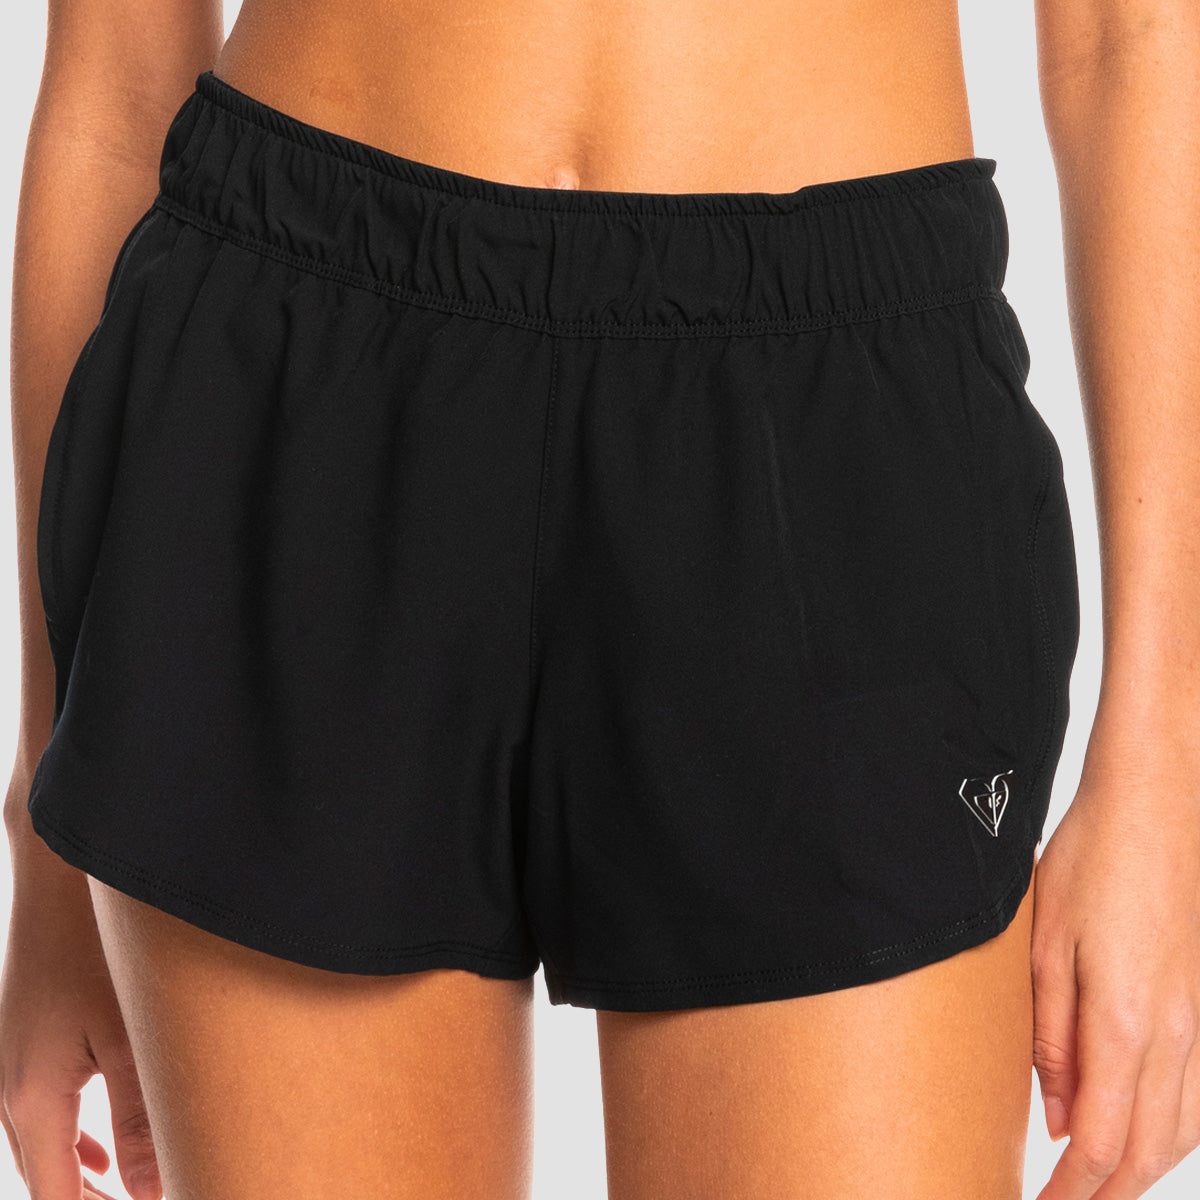 Roxy Move Free Sports Shorts Anthracite - Womens